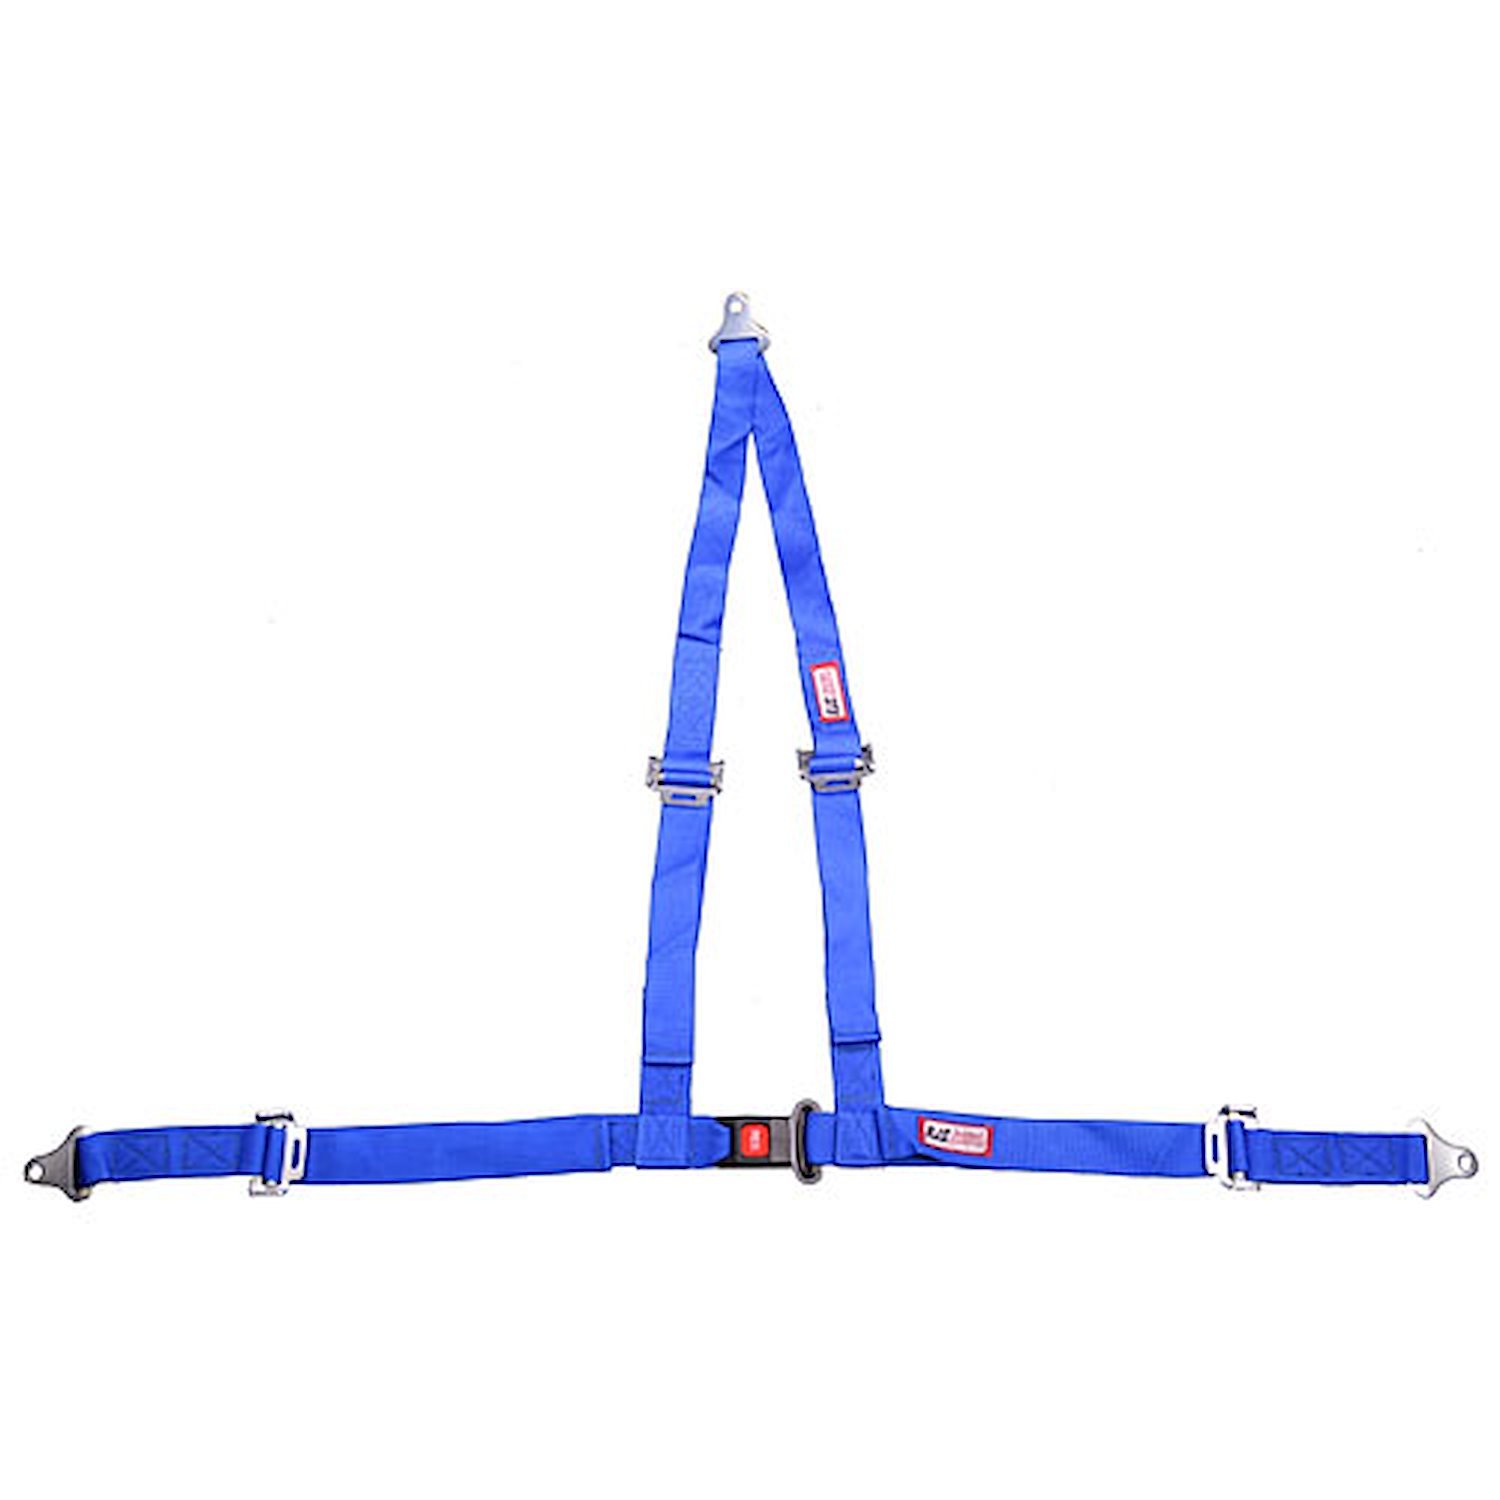 NON-SFI B&T HARNESS 2 PULL DOWN Lap Belt SNAP 2 S. H. Individual ROLL BAR Mount WRAP/SNAP w/STERNUM STRAP BLUE